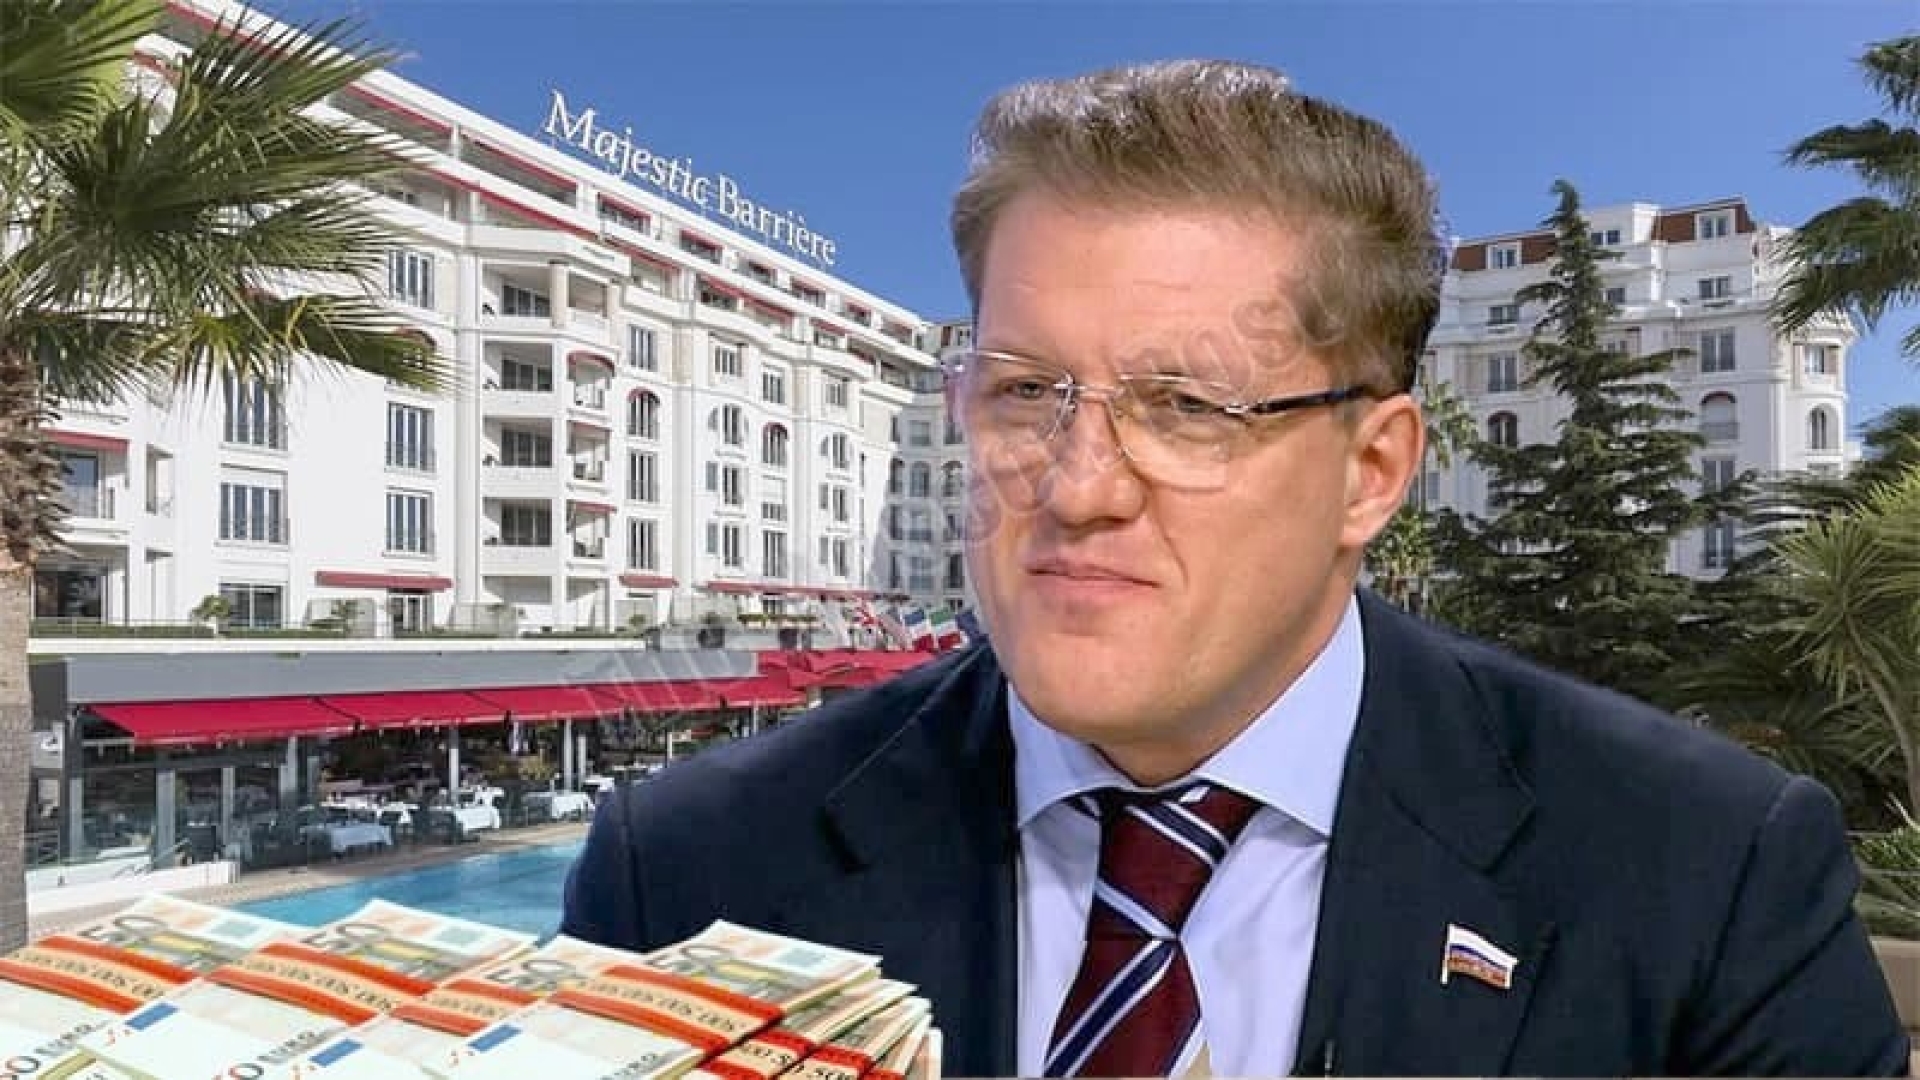 Zharkov does not need Côte d’Azur, he needs euros in cash